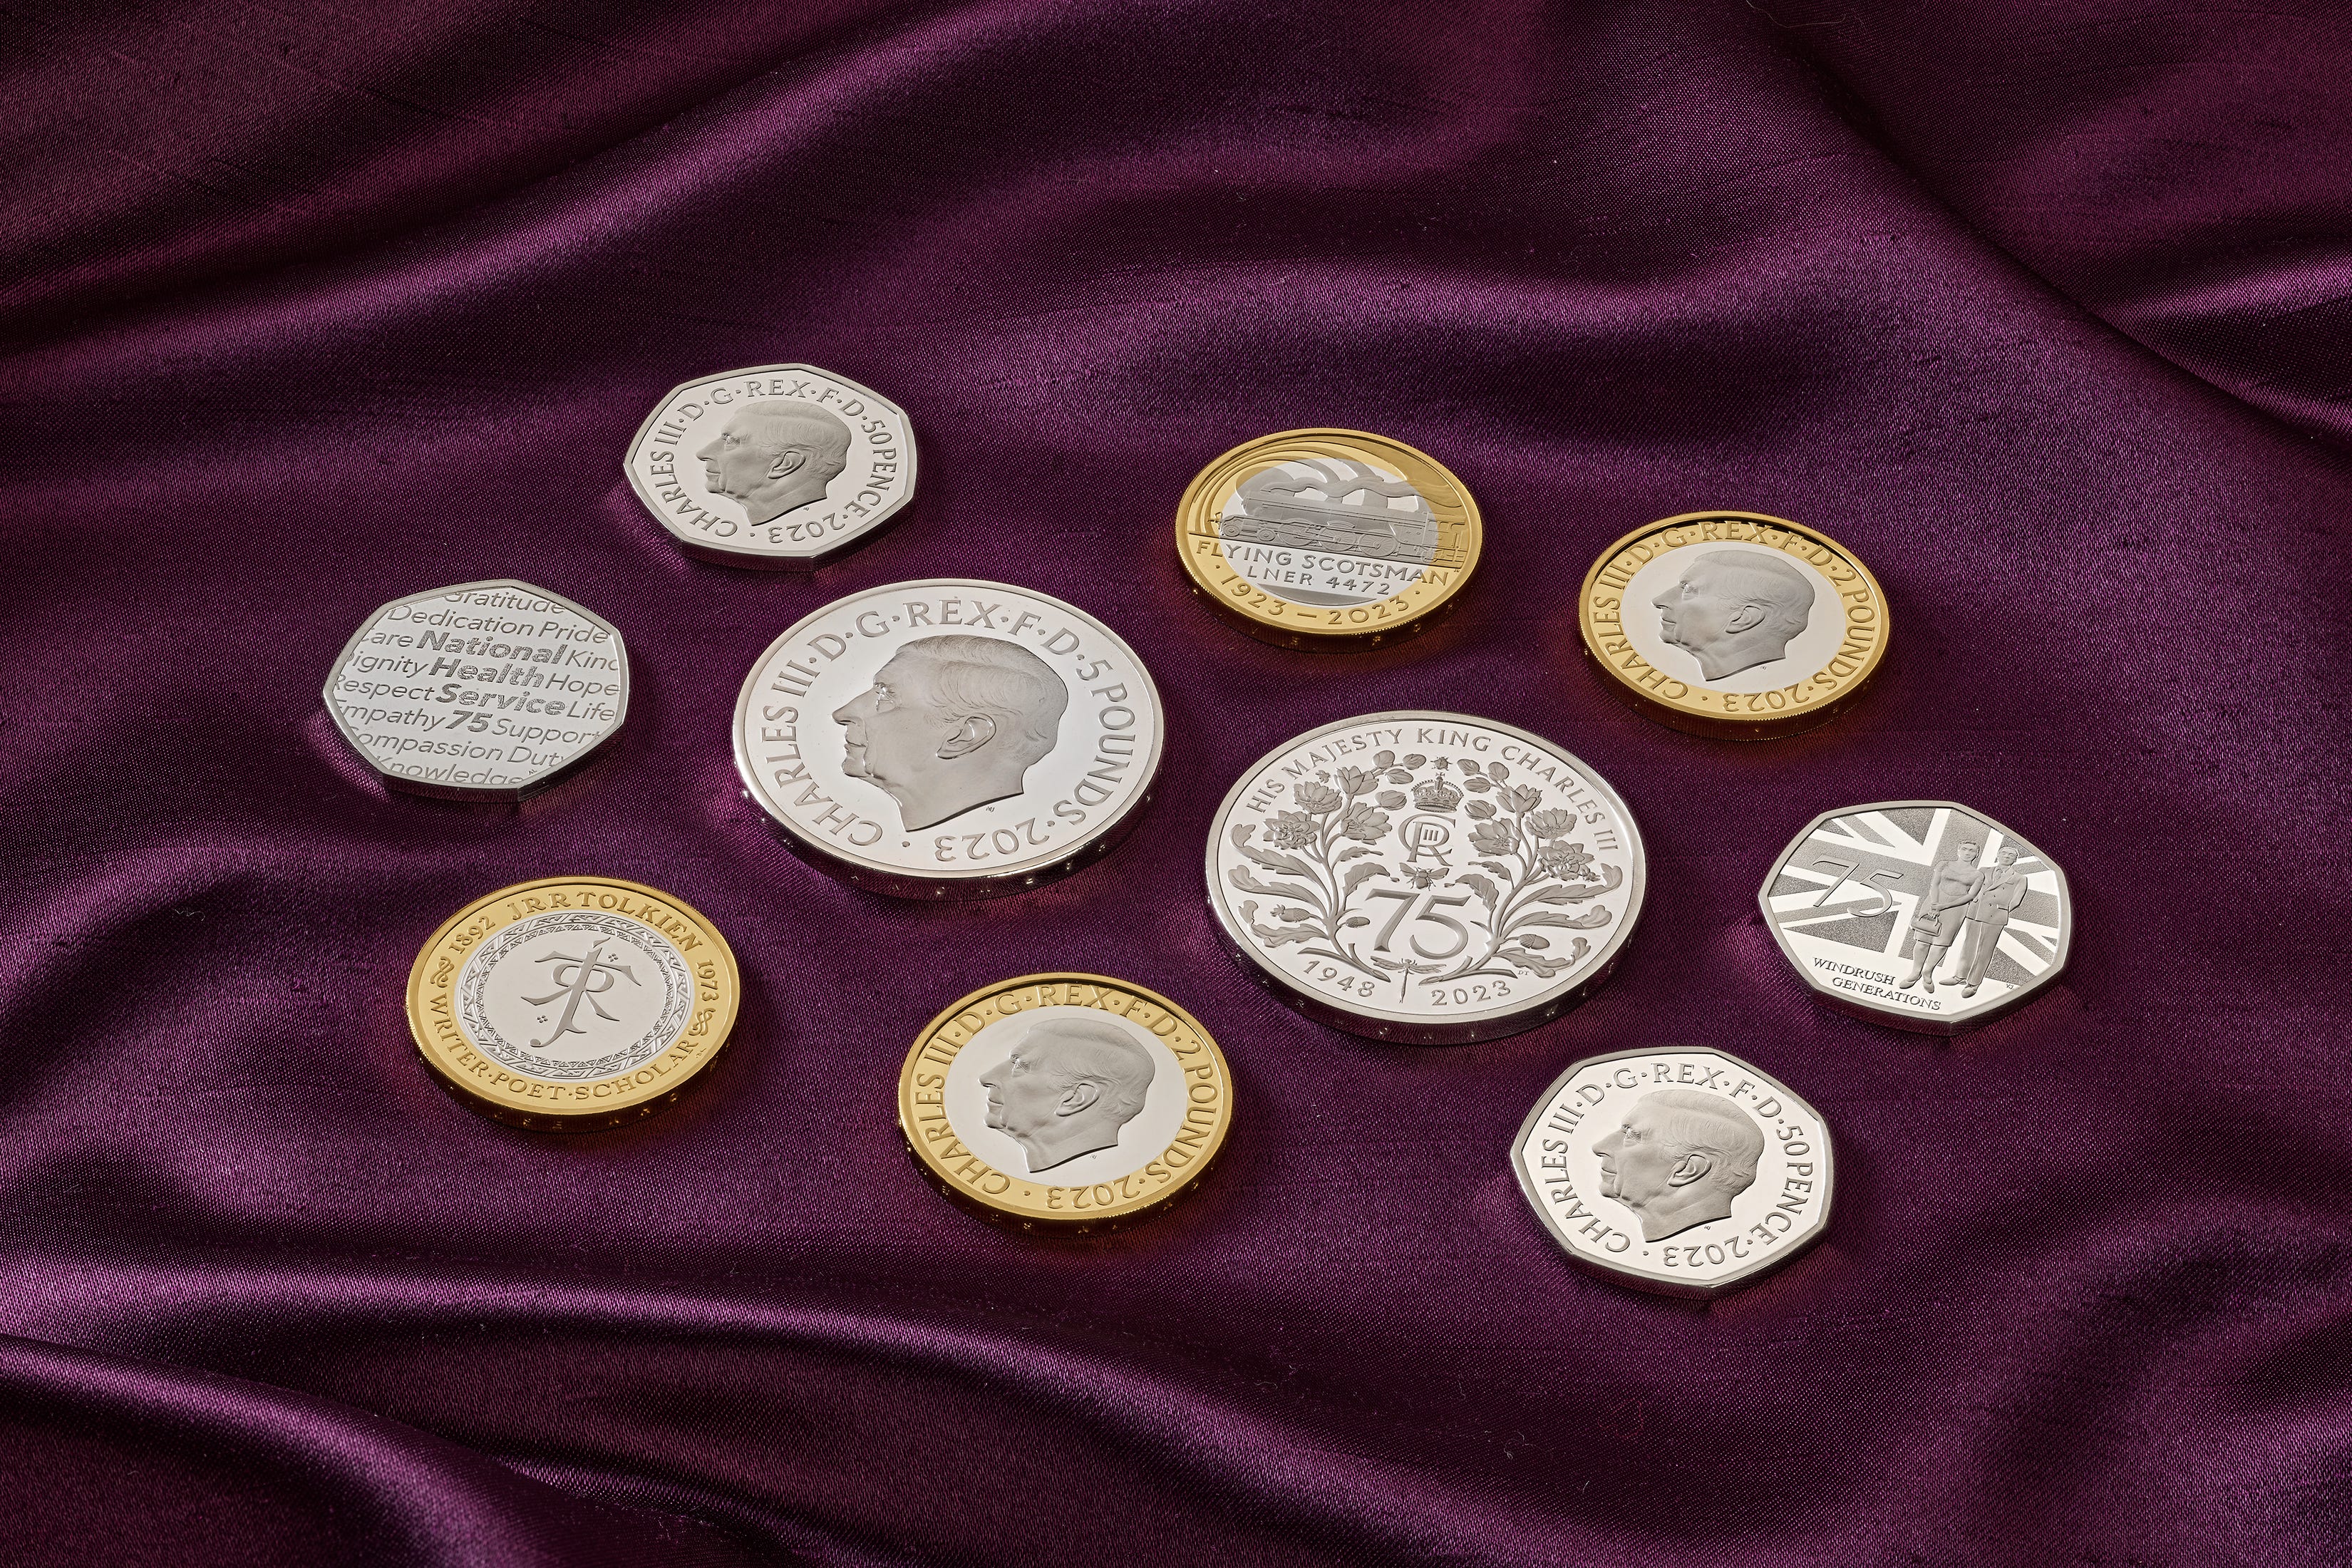 Coins in the commemorative collection will mark milestone anniversaries and moments in history (Royal Mint/PA)